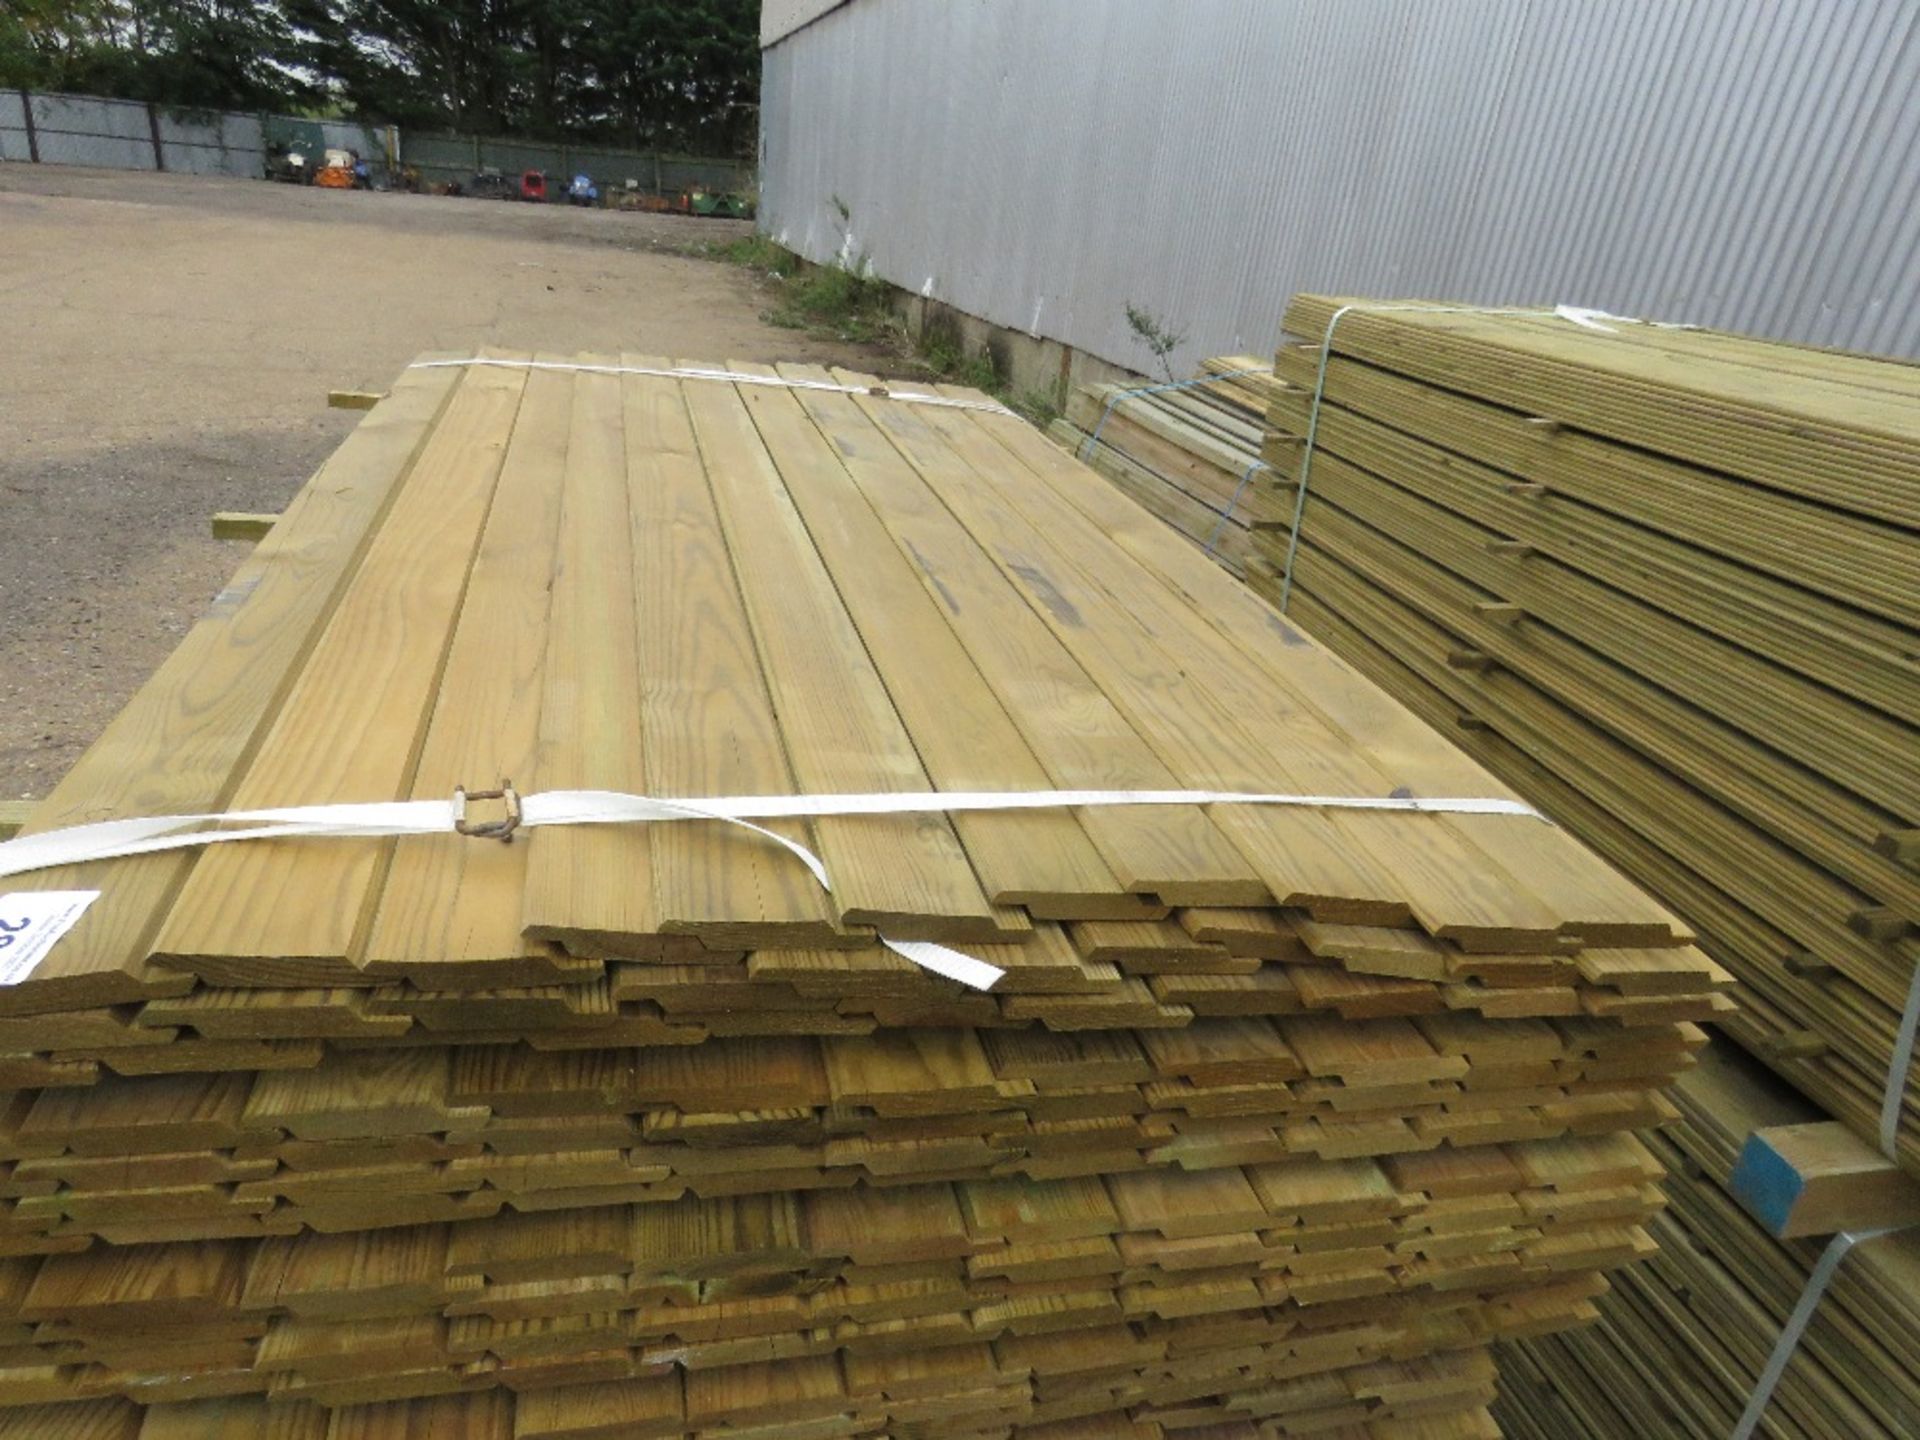 LARGE PACK OF TREATED SHIPLAP TIMBER CLADDING BOARDS, 1.83M LENGTH X 9.5CM WIDTH APPROX. - Image 4 of 4